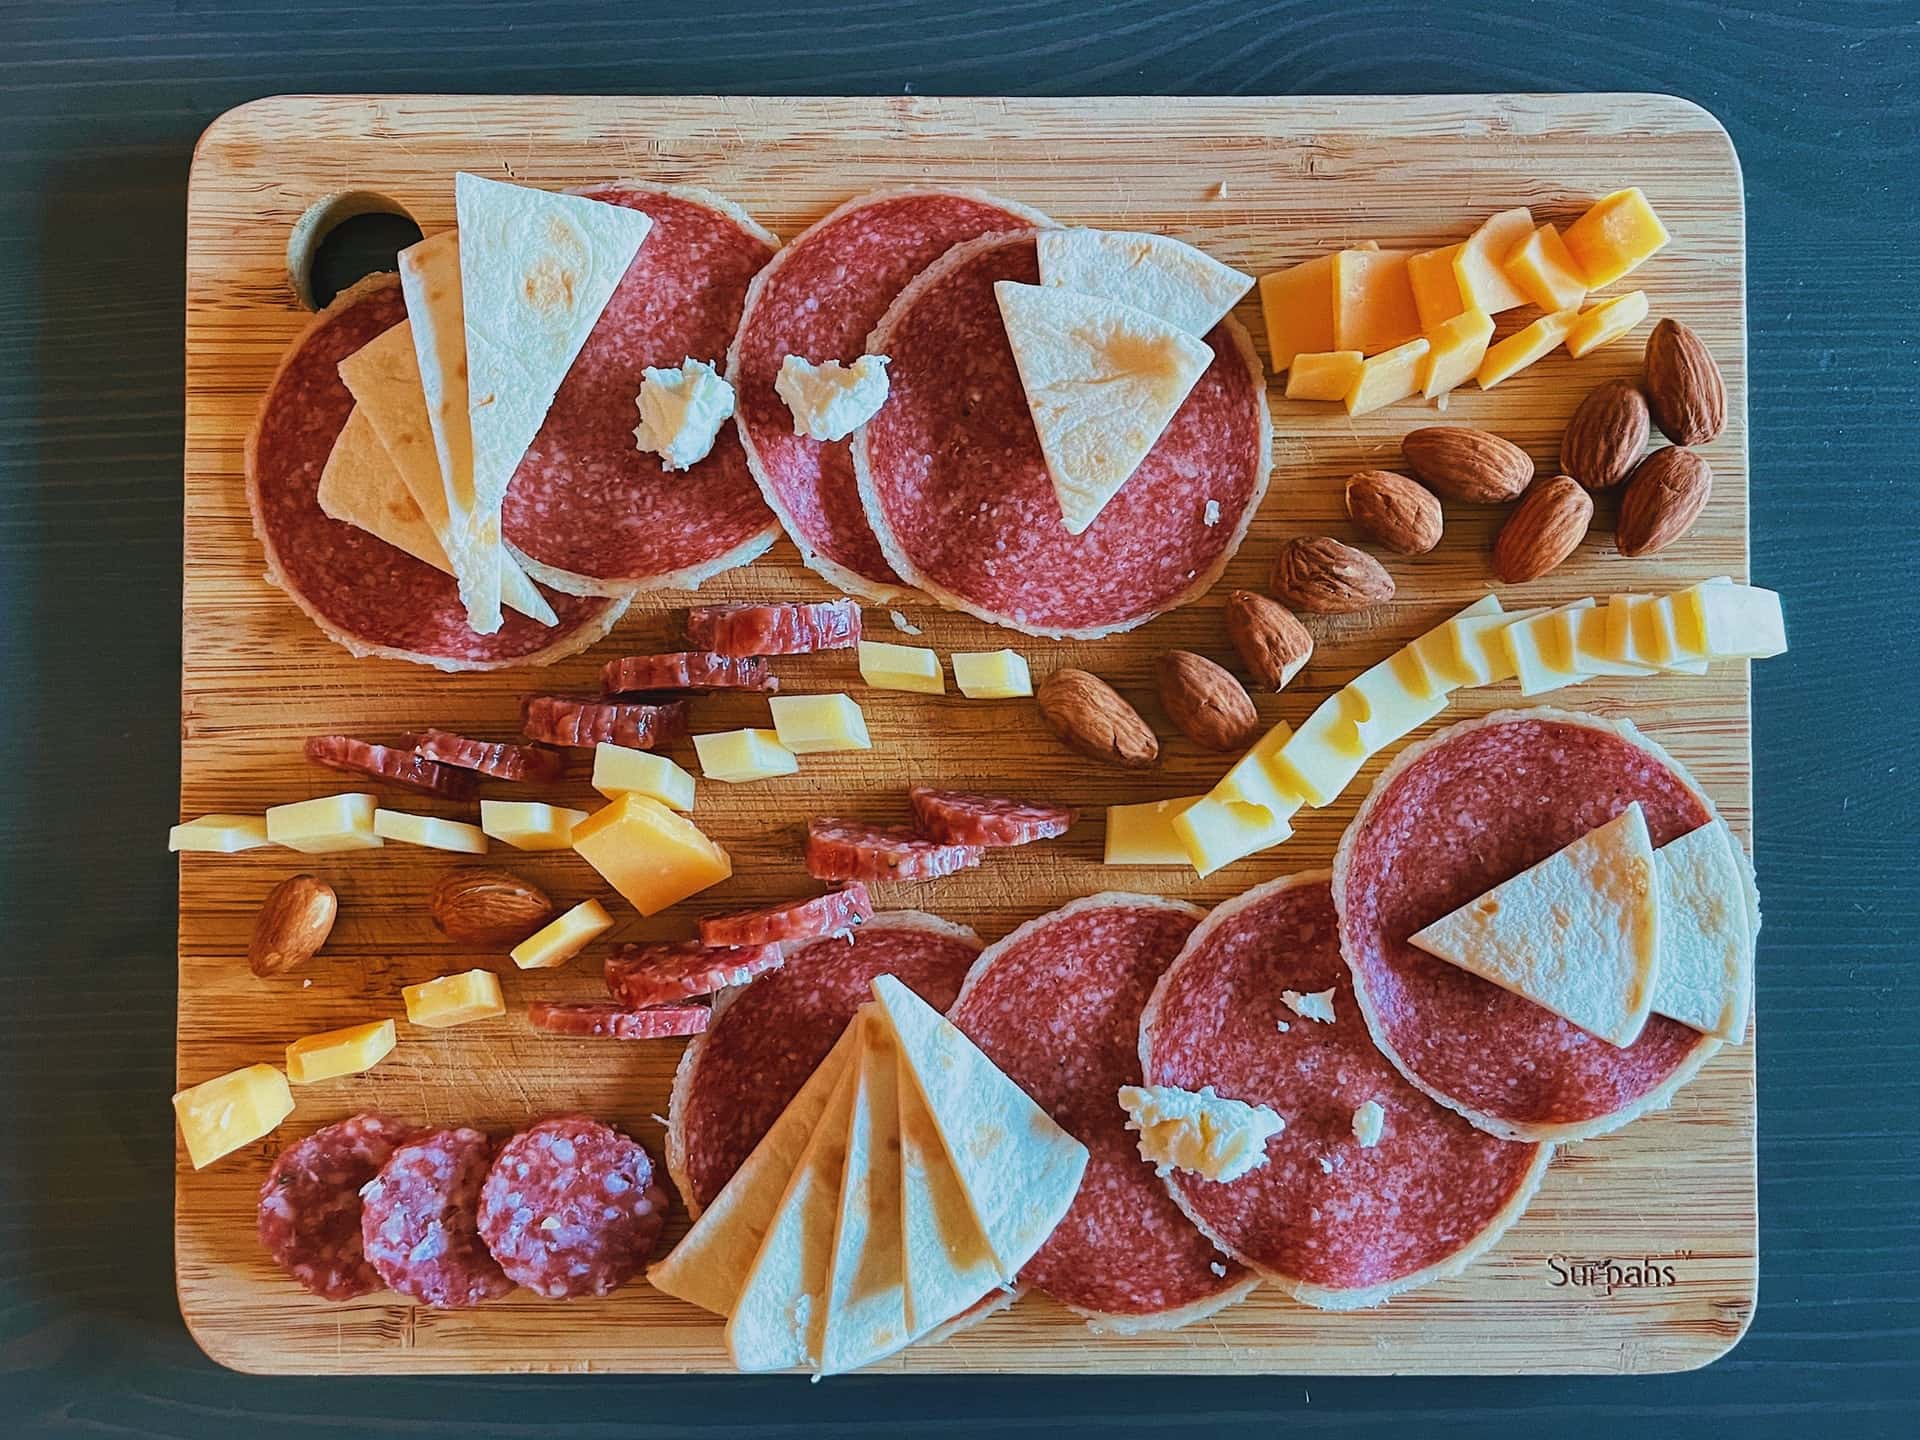 cured meat on a wooden cutting board